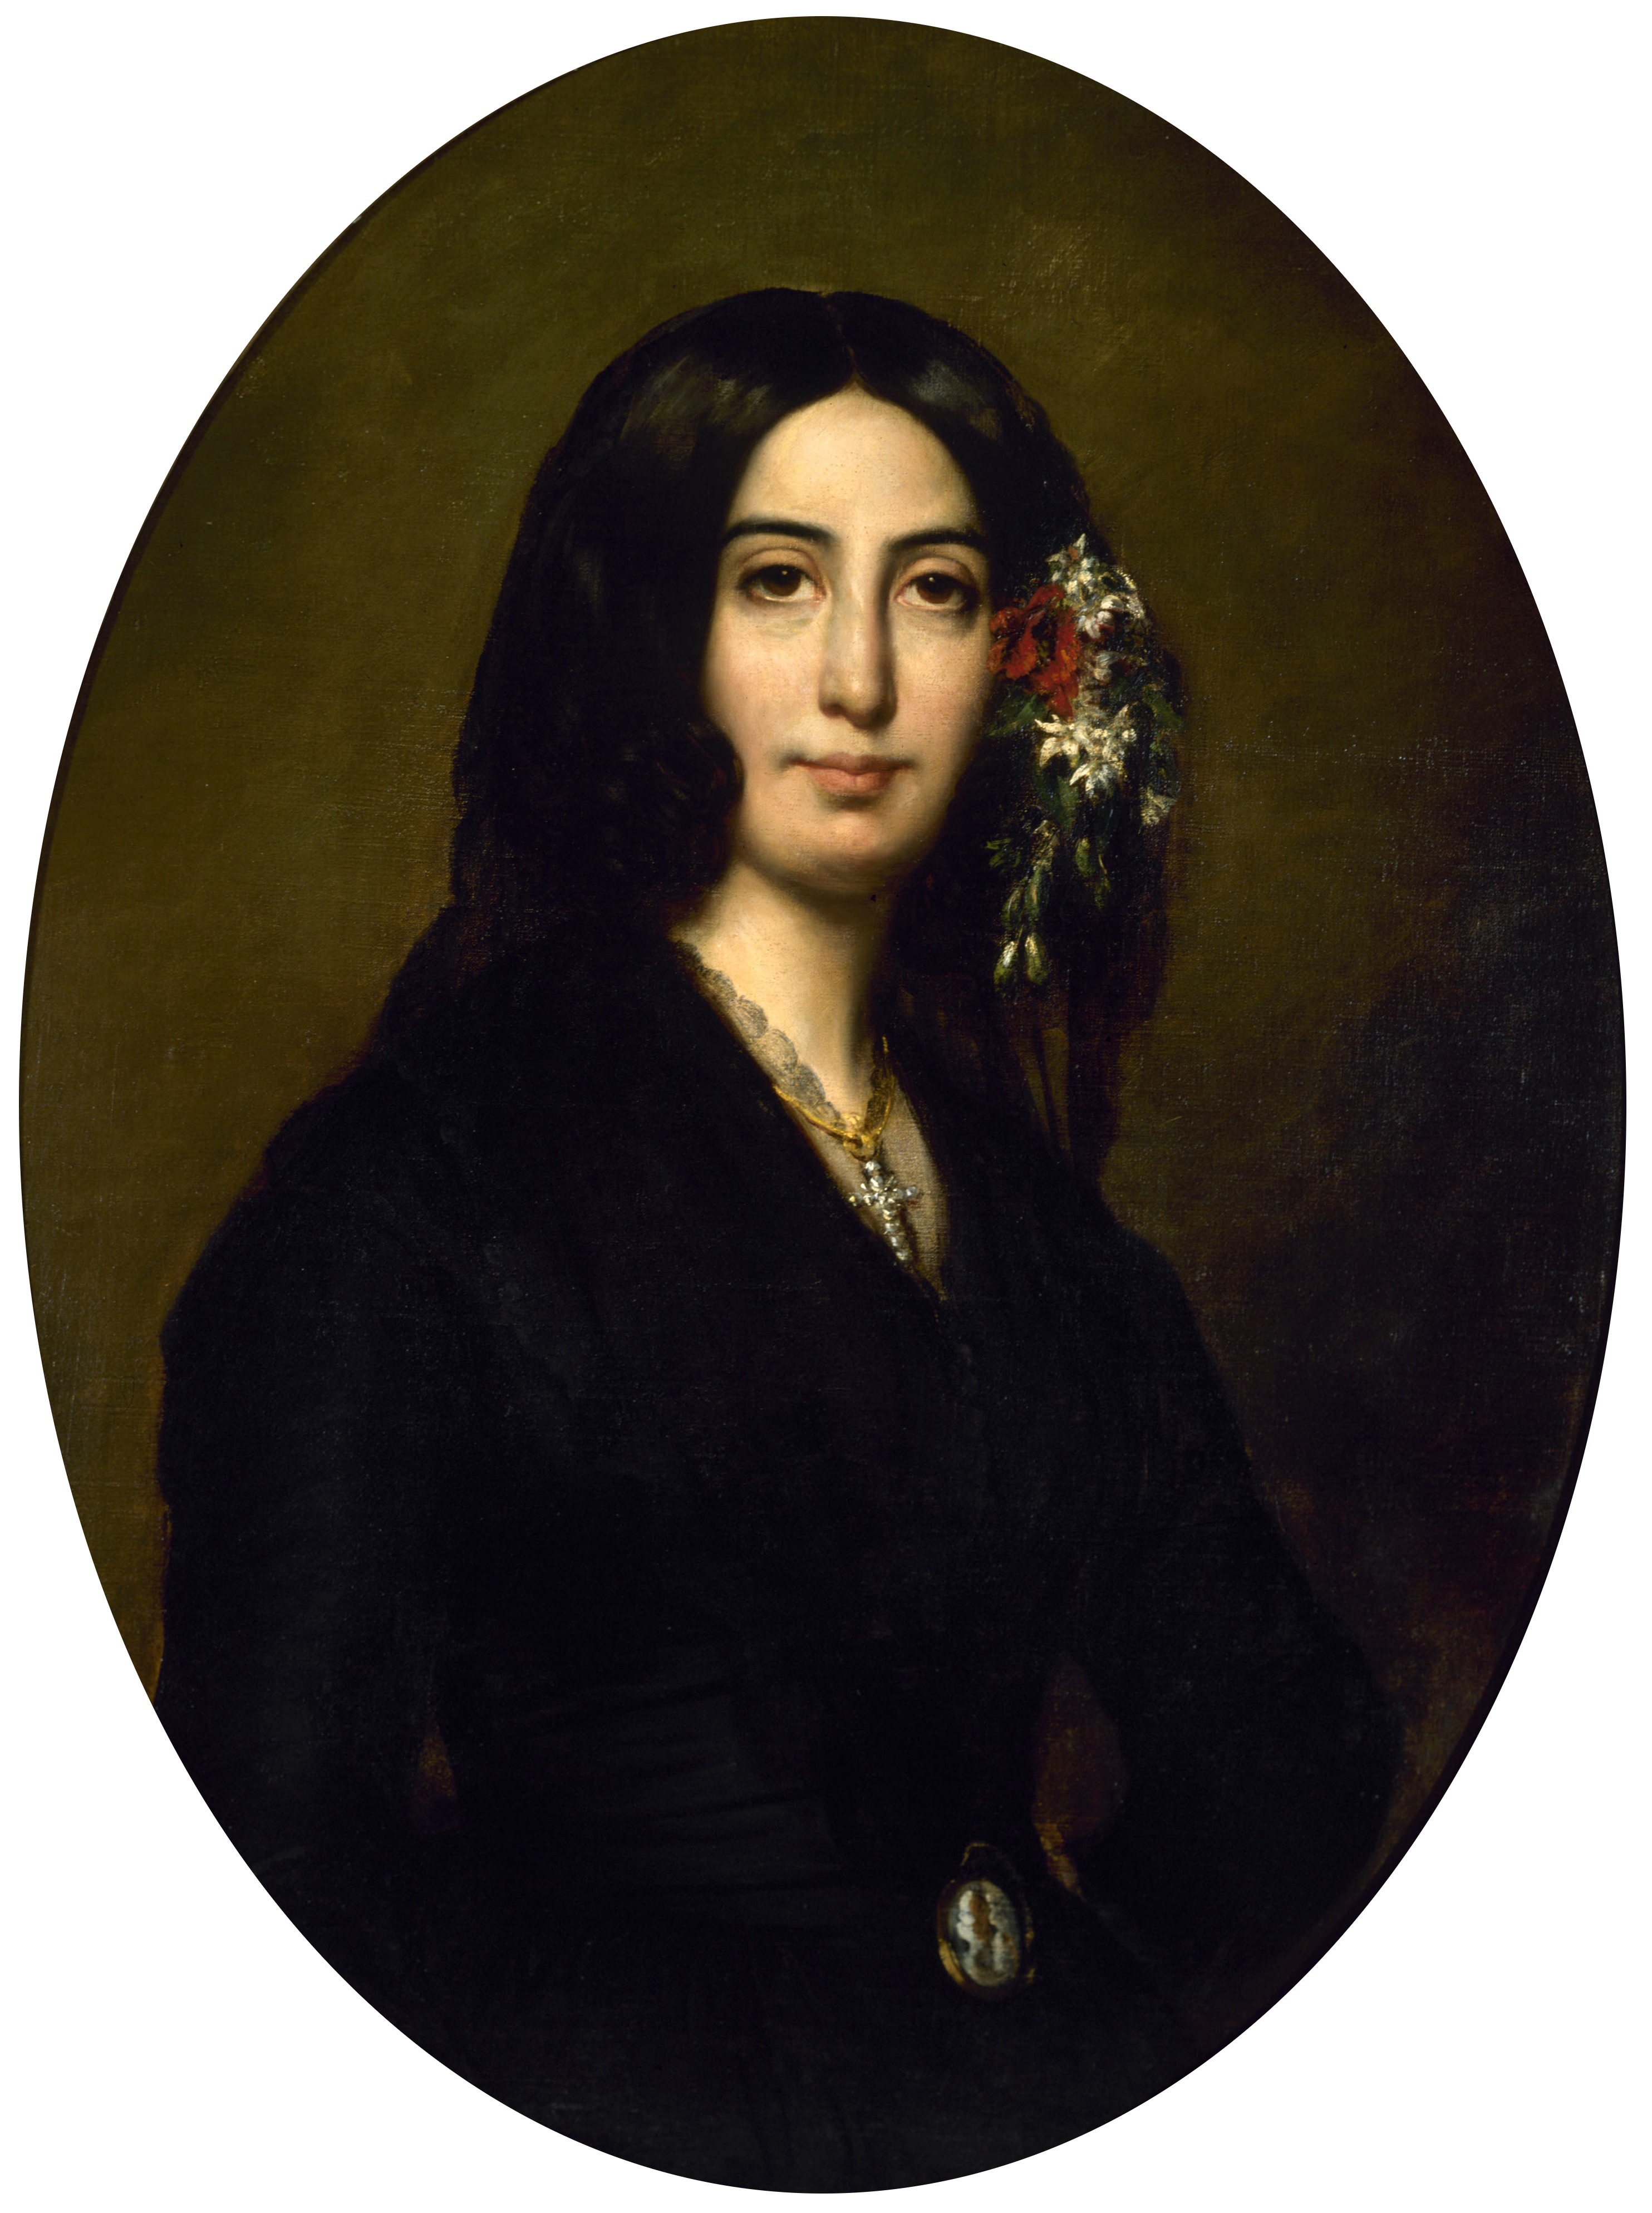 Portrait of George Sand by [[Auguste Charpentier]] (1838)